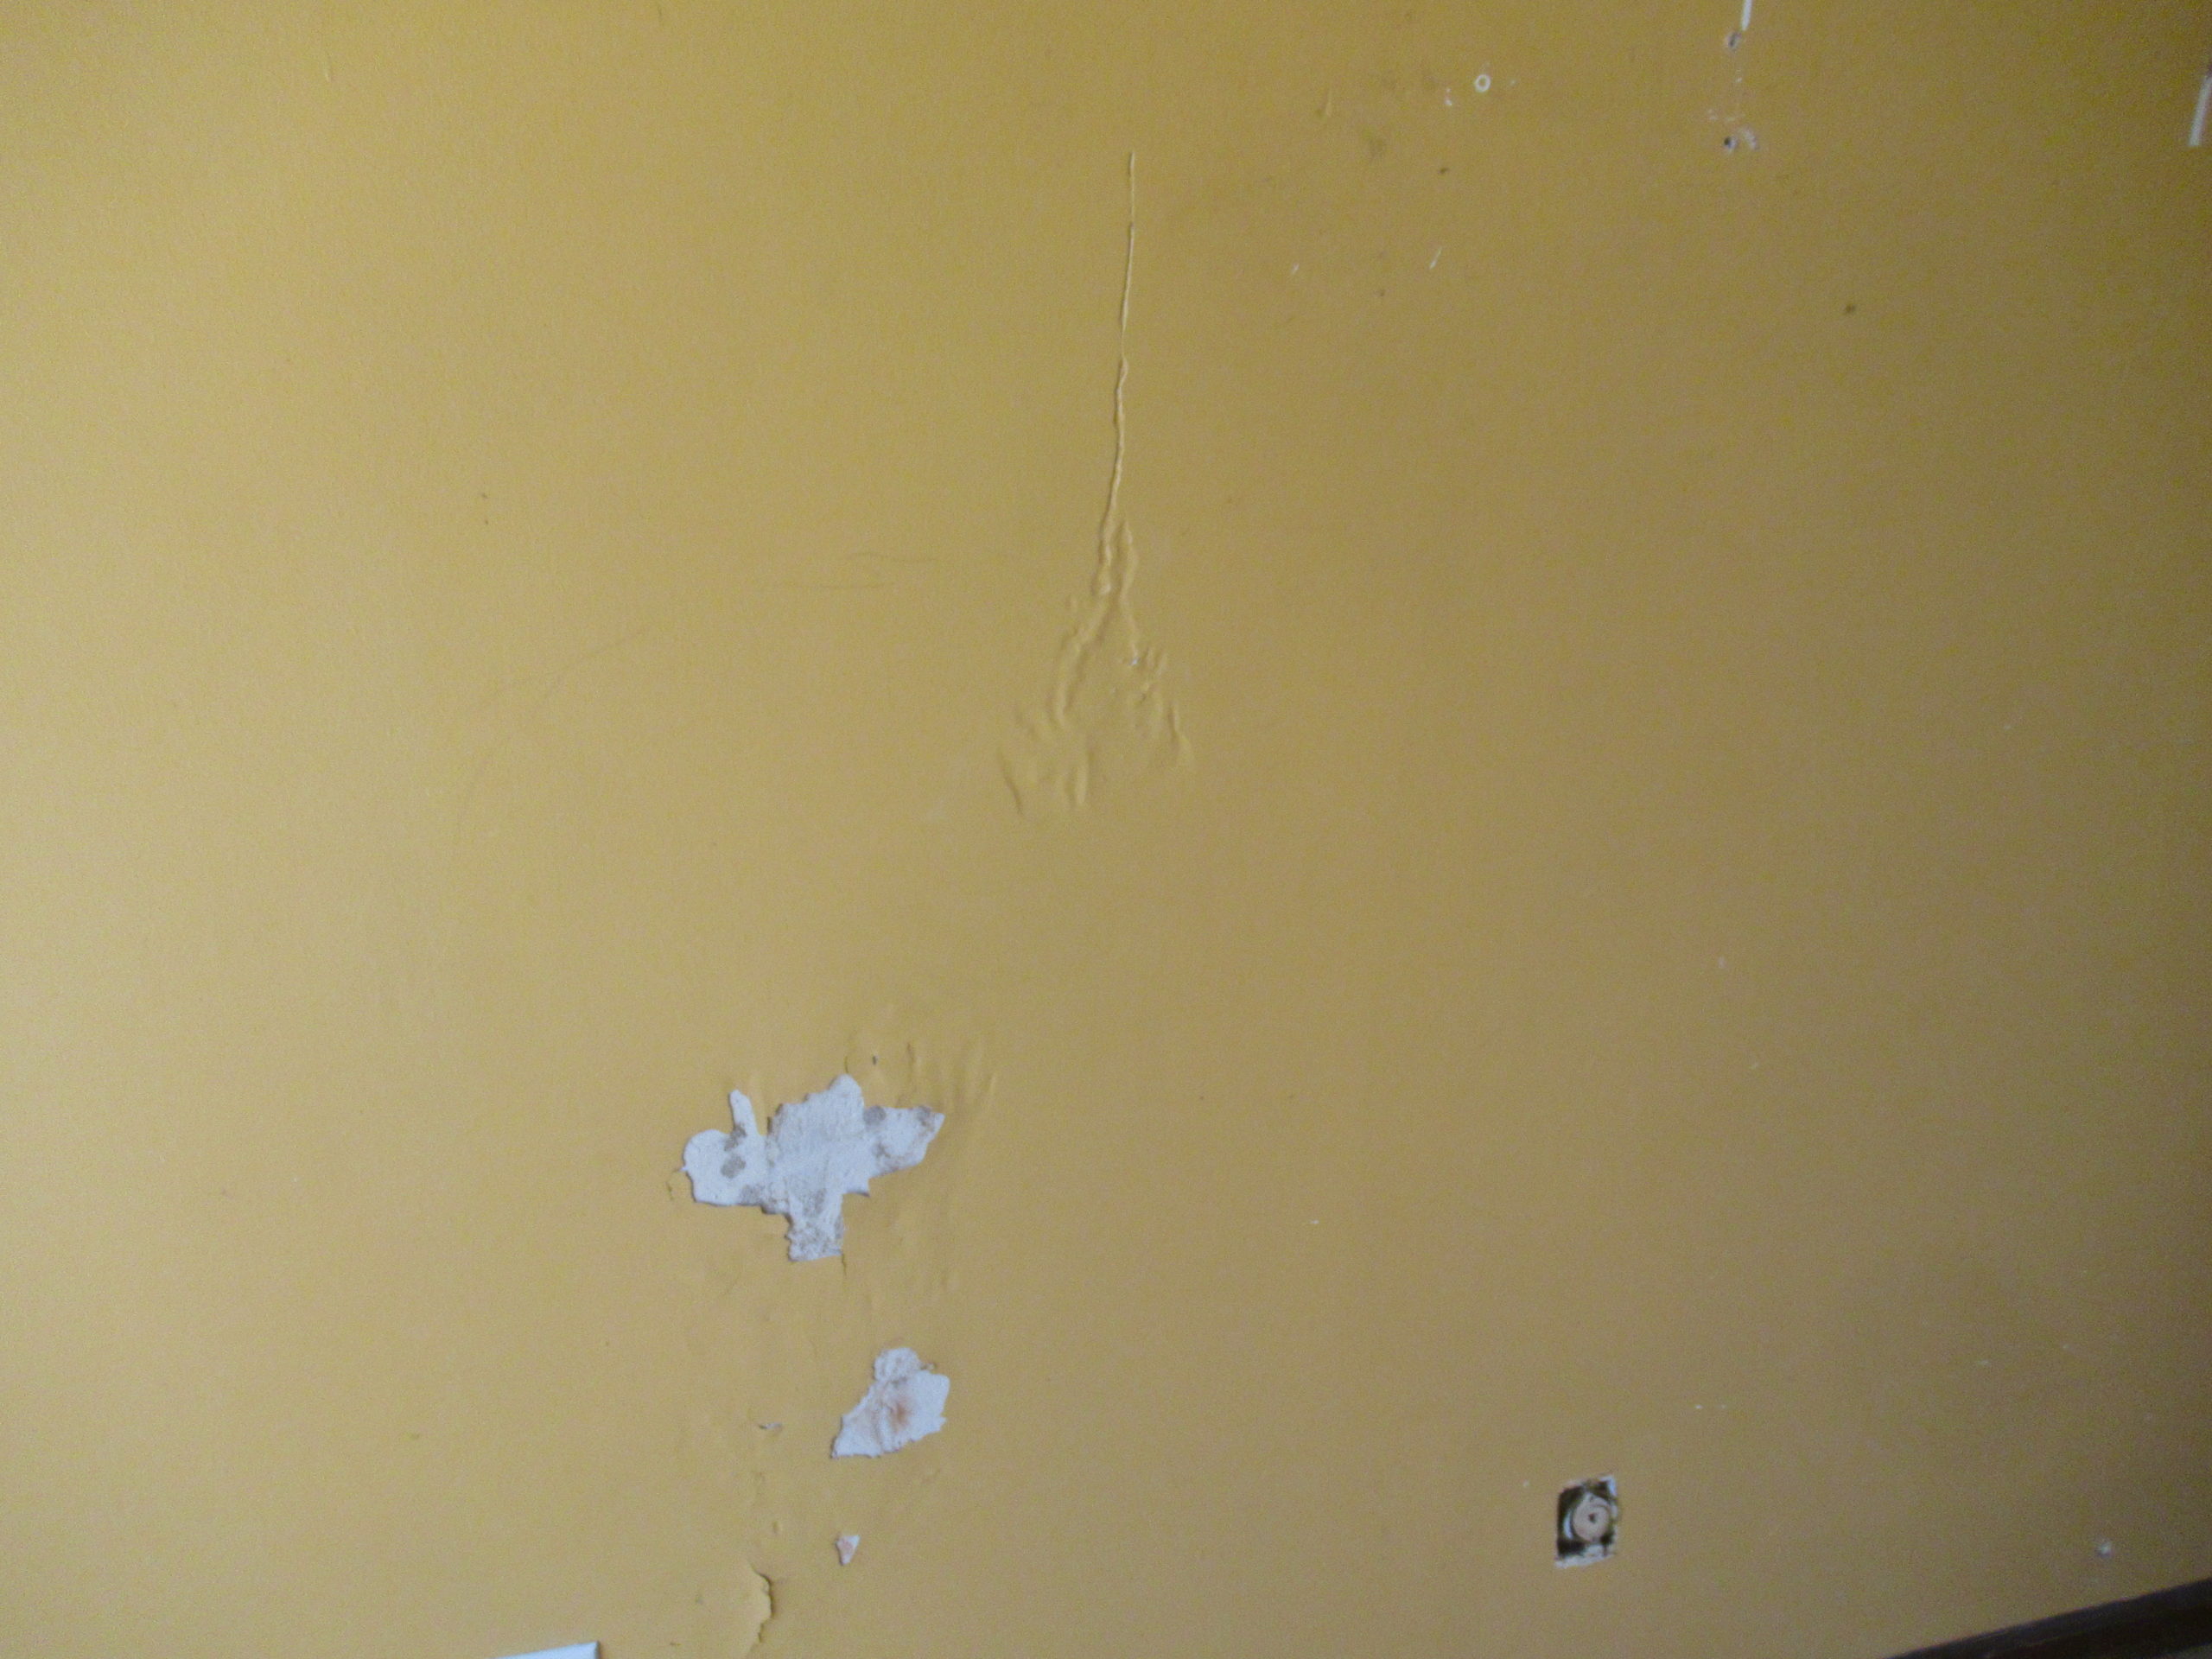 Termite tunnels in drywall